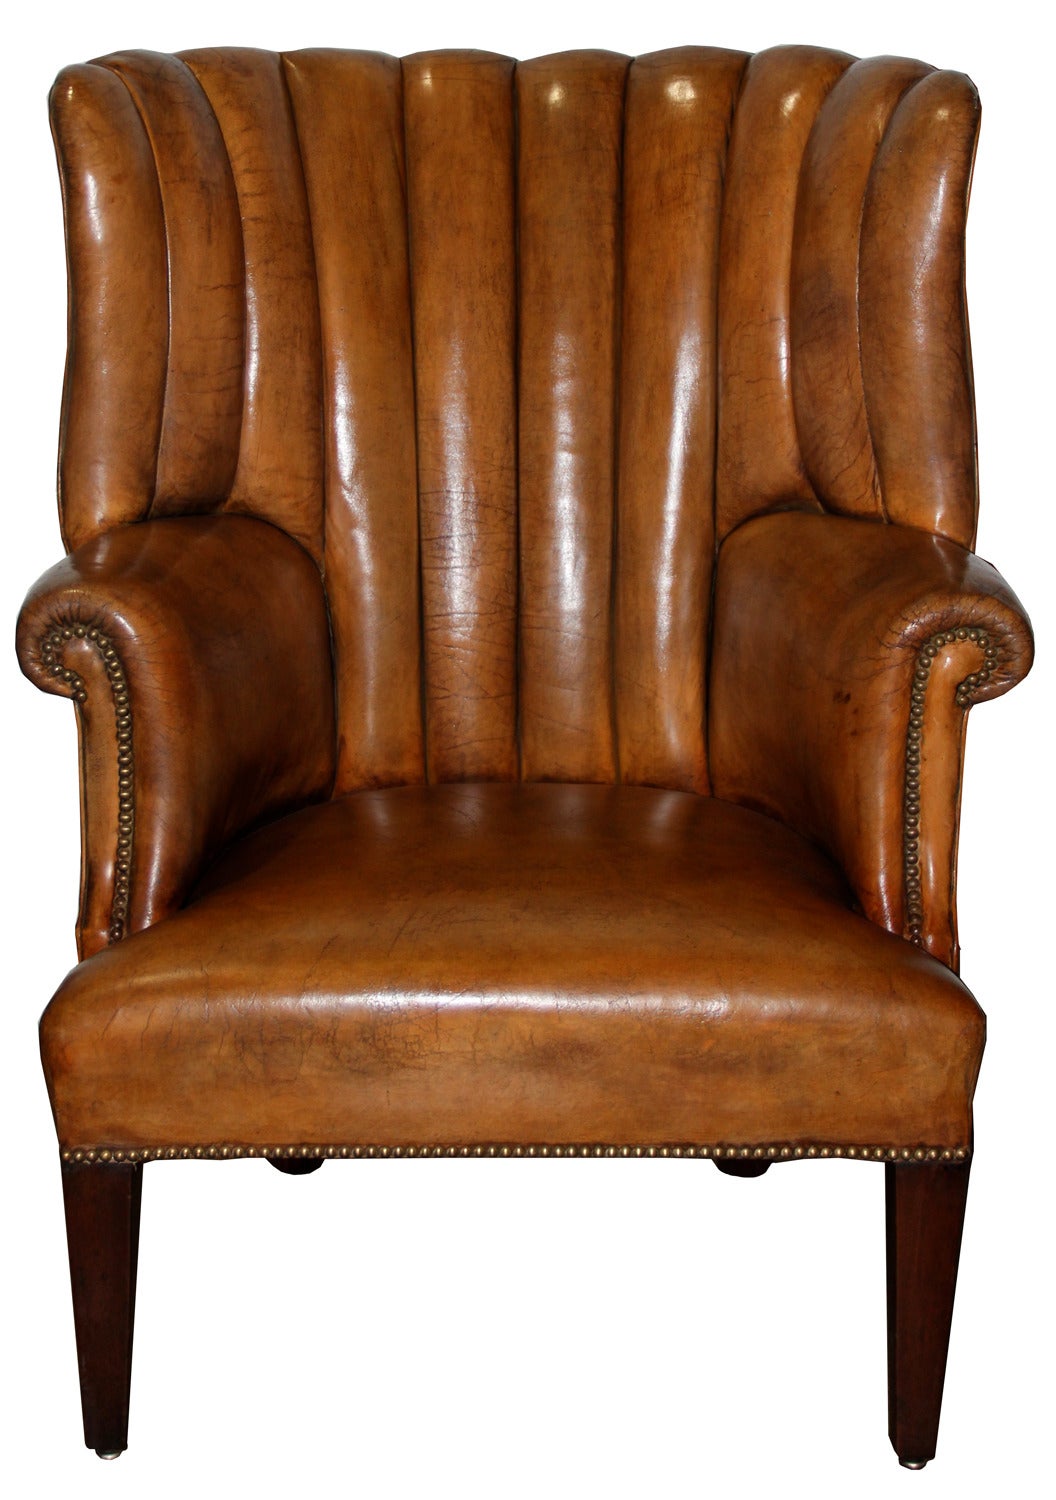 Impressive 19th Century English Leather Library Chair For Sale